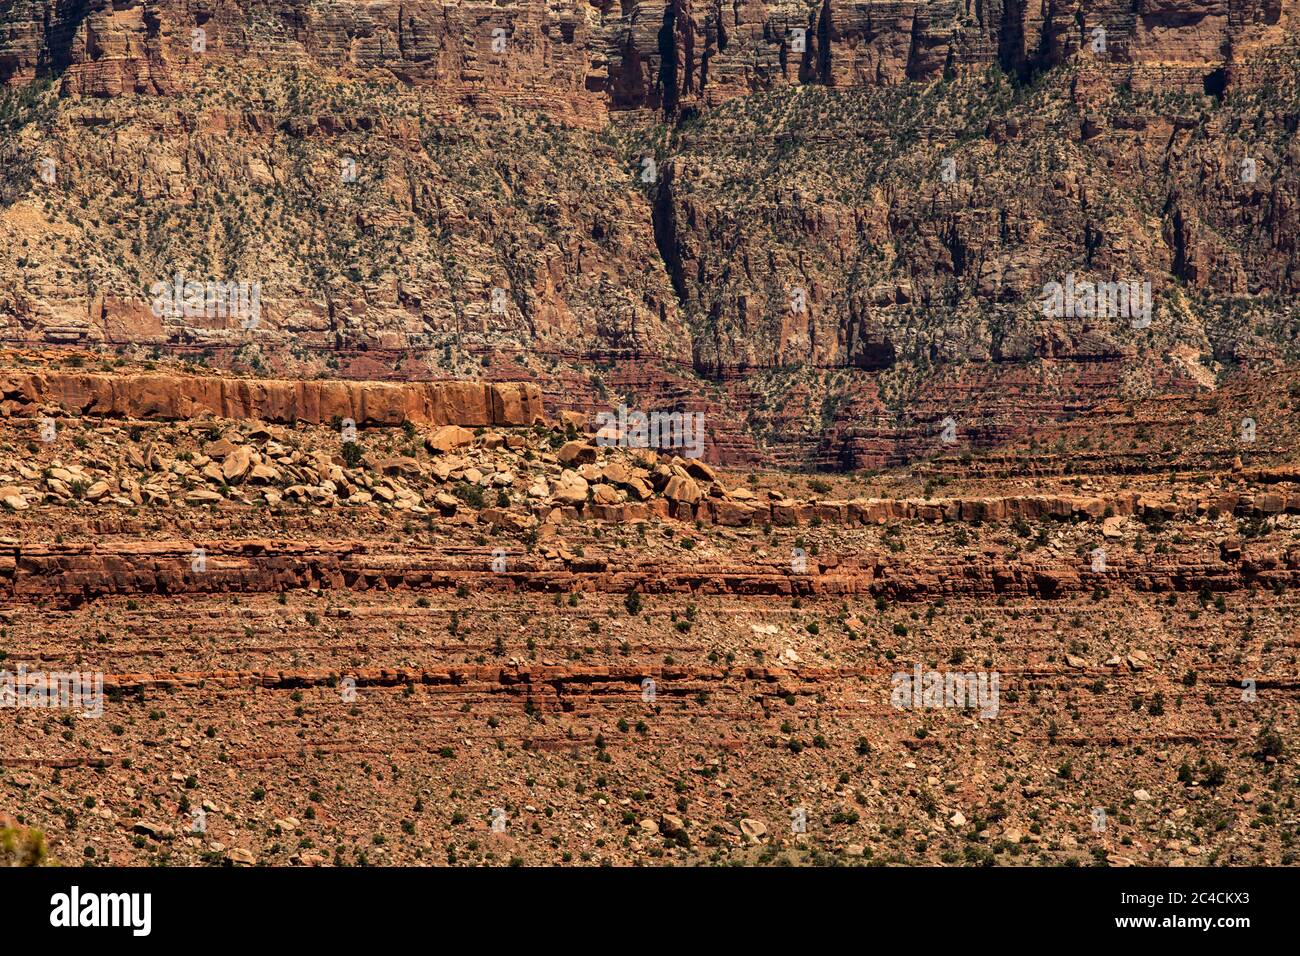 The Grand Canyon, one of the seven natural wonders of the world. Stock Photo